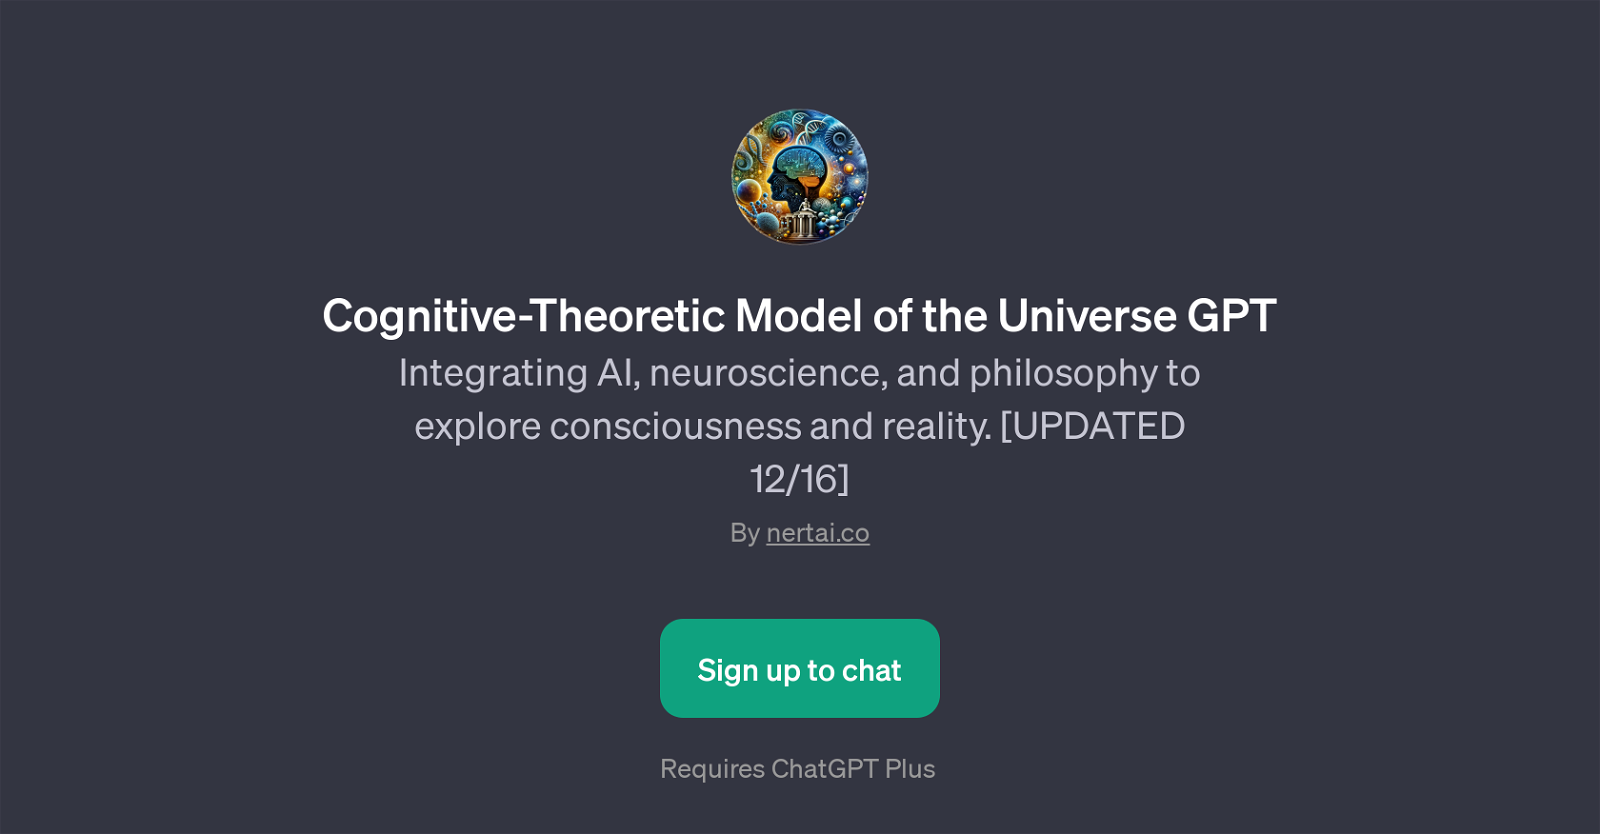 Cognitive-Theoretic Model of the Universe GPT website